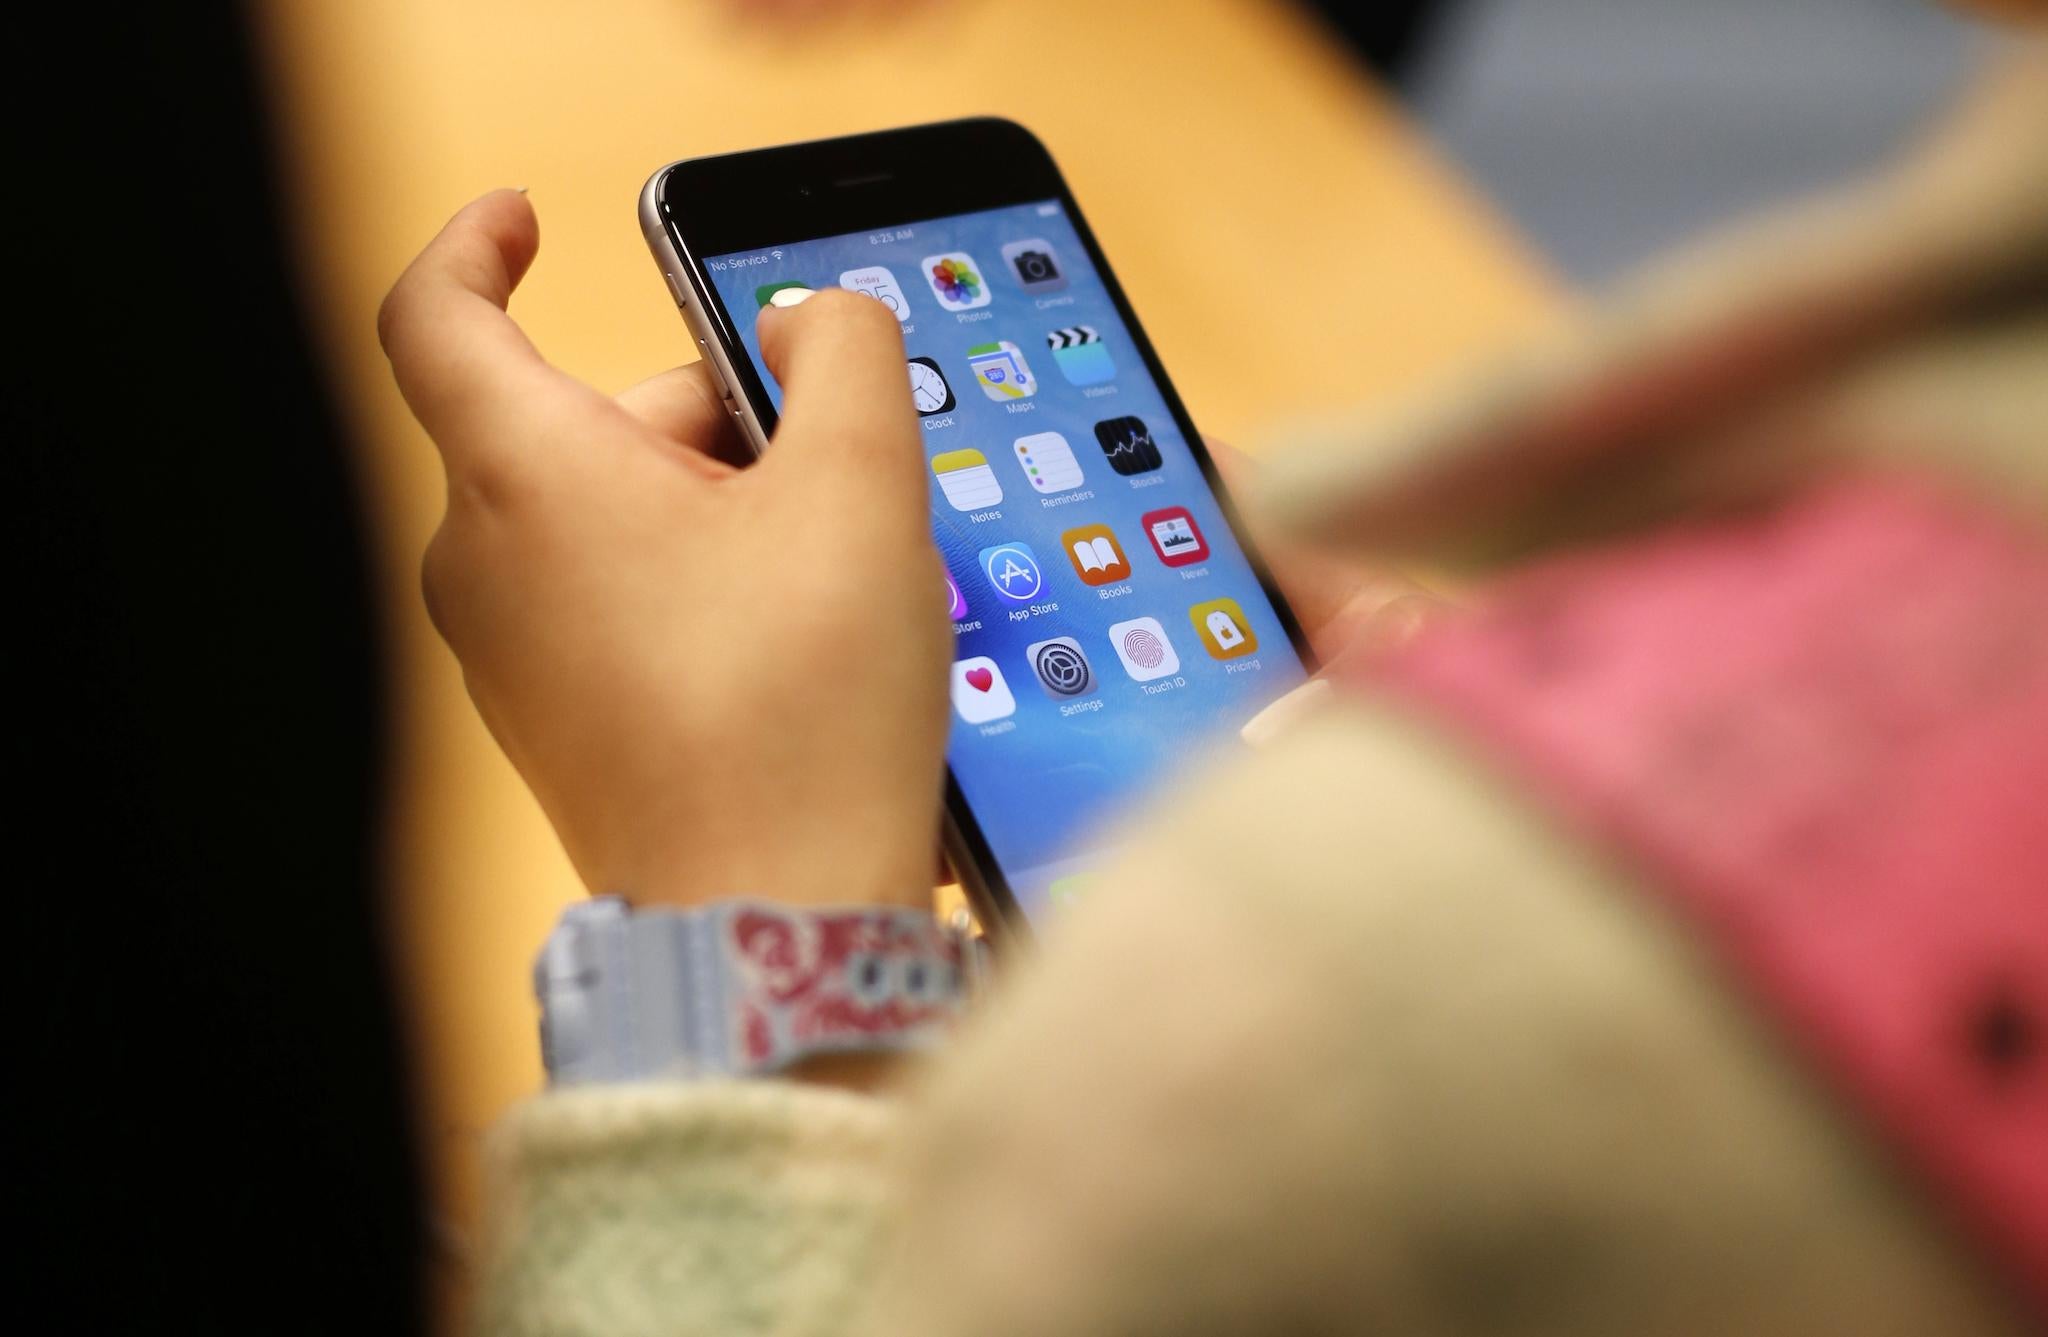 The new forms warn victims they will be investigated if evidence is found on their phones relating to other criminal offences - with campaigners saying this has caused victims to fear they will be investigated for minor offences